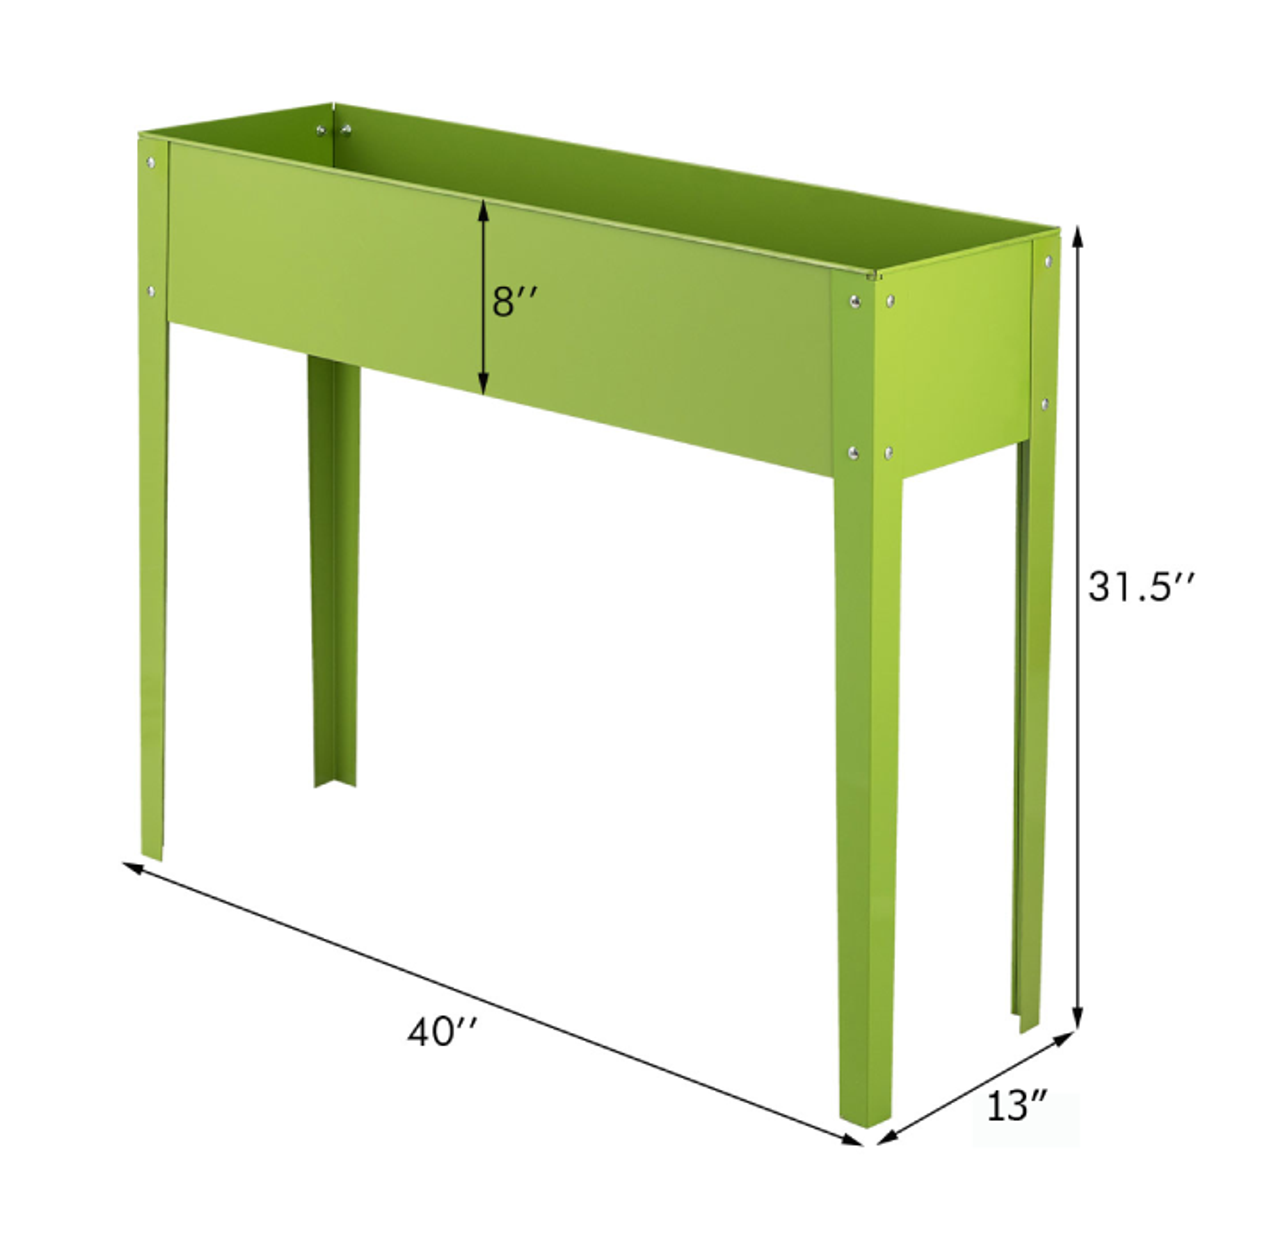 Elevated 40" x 12" Outdoor Garden Plant Stand product image